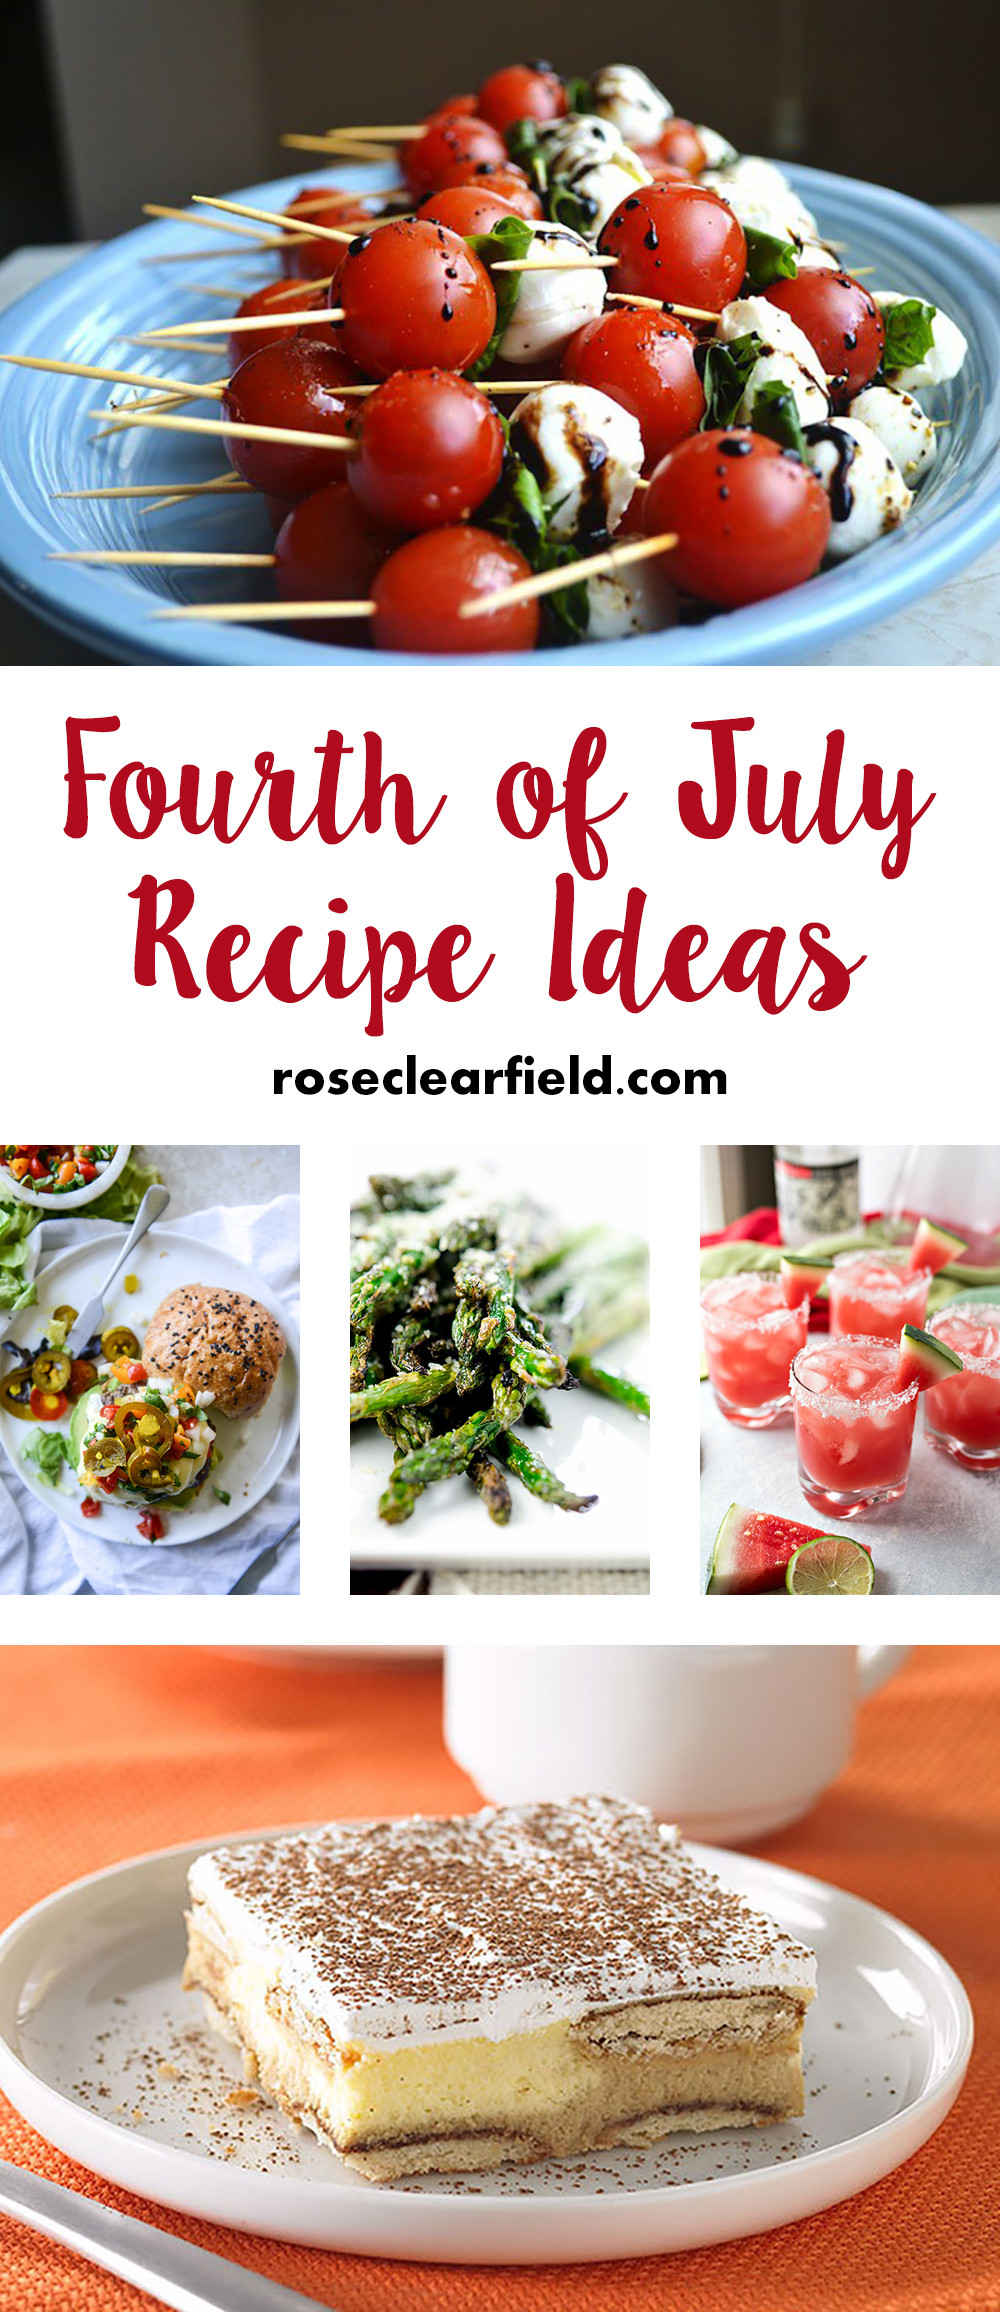 Fourth Of July Recipe Ideas
 Fourth of July Recipe Ideas • Rose Clearfield